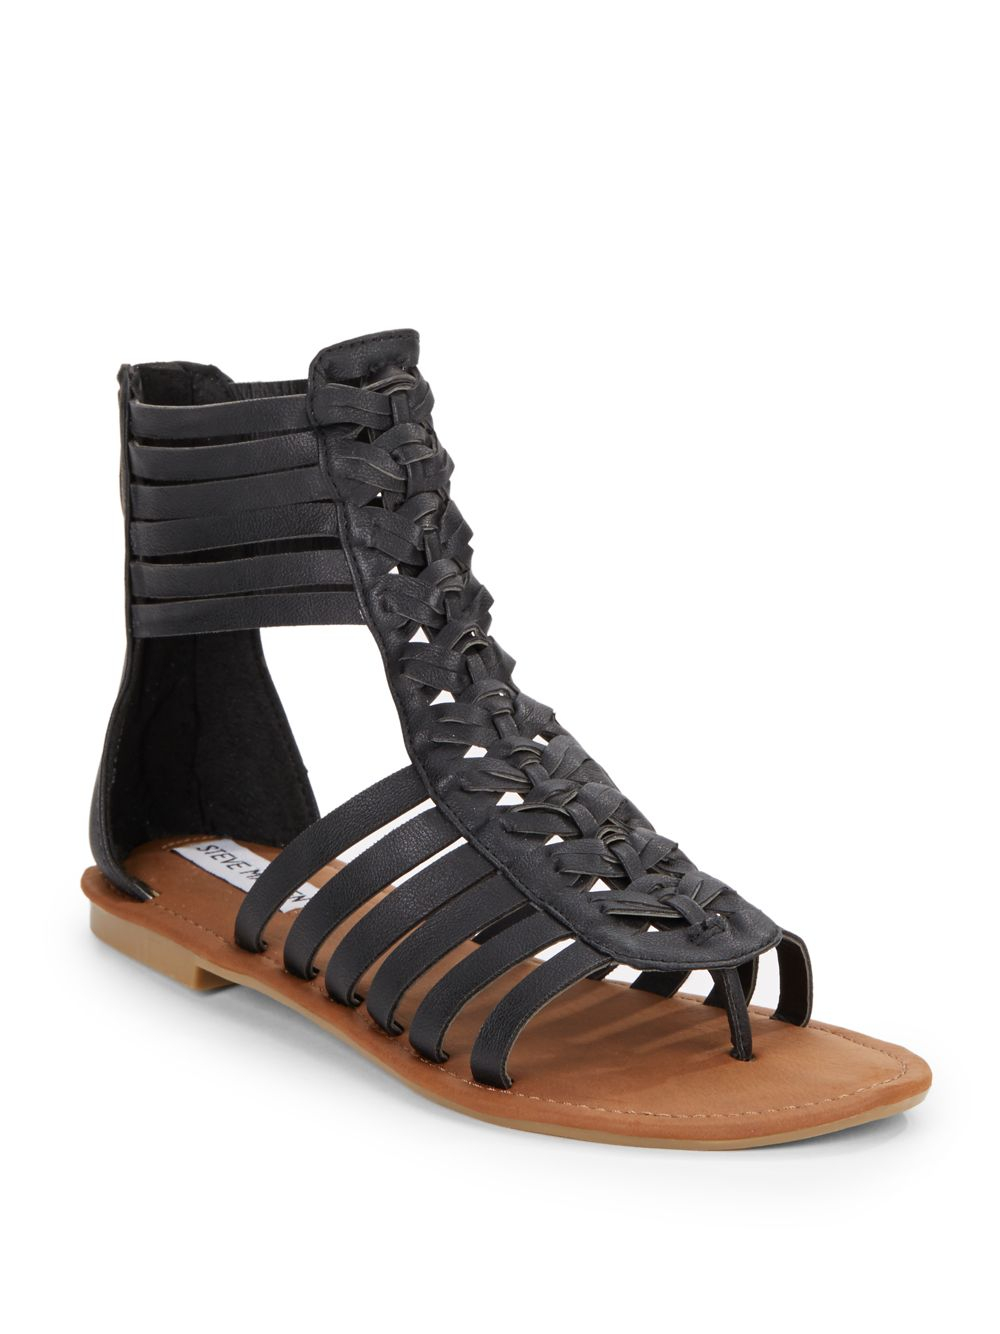 Lyst - Steve Madden Grete Strappy Faux Leather Sandals in Black